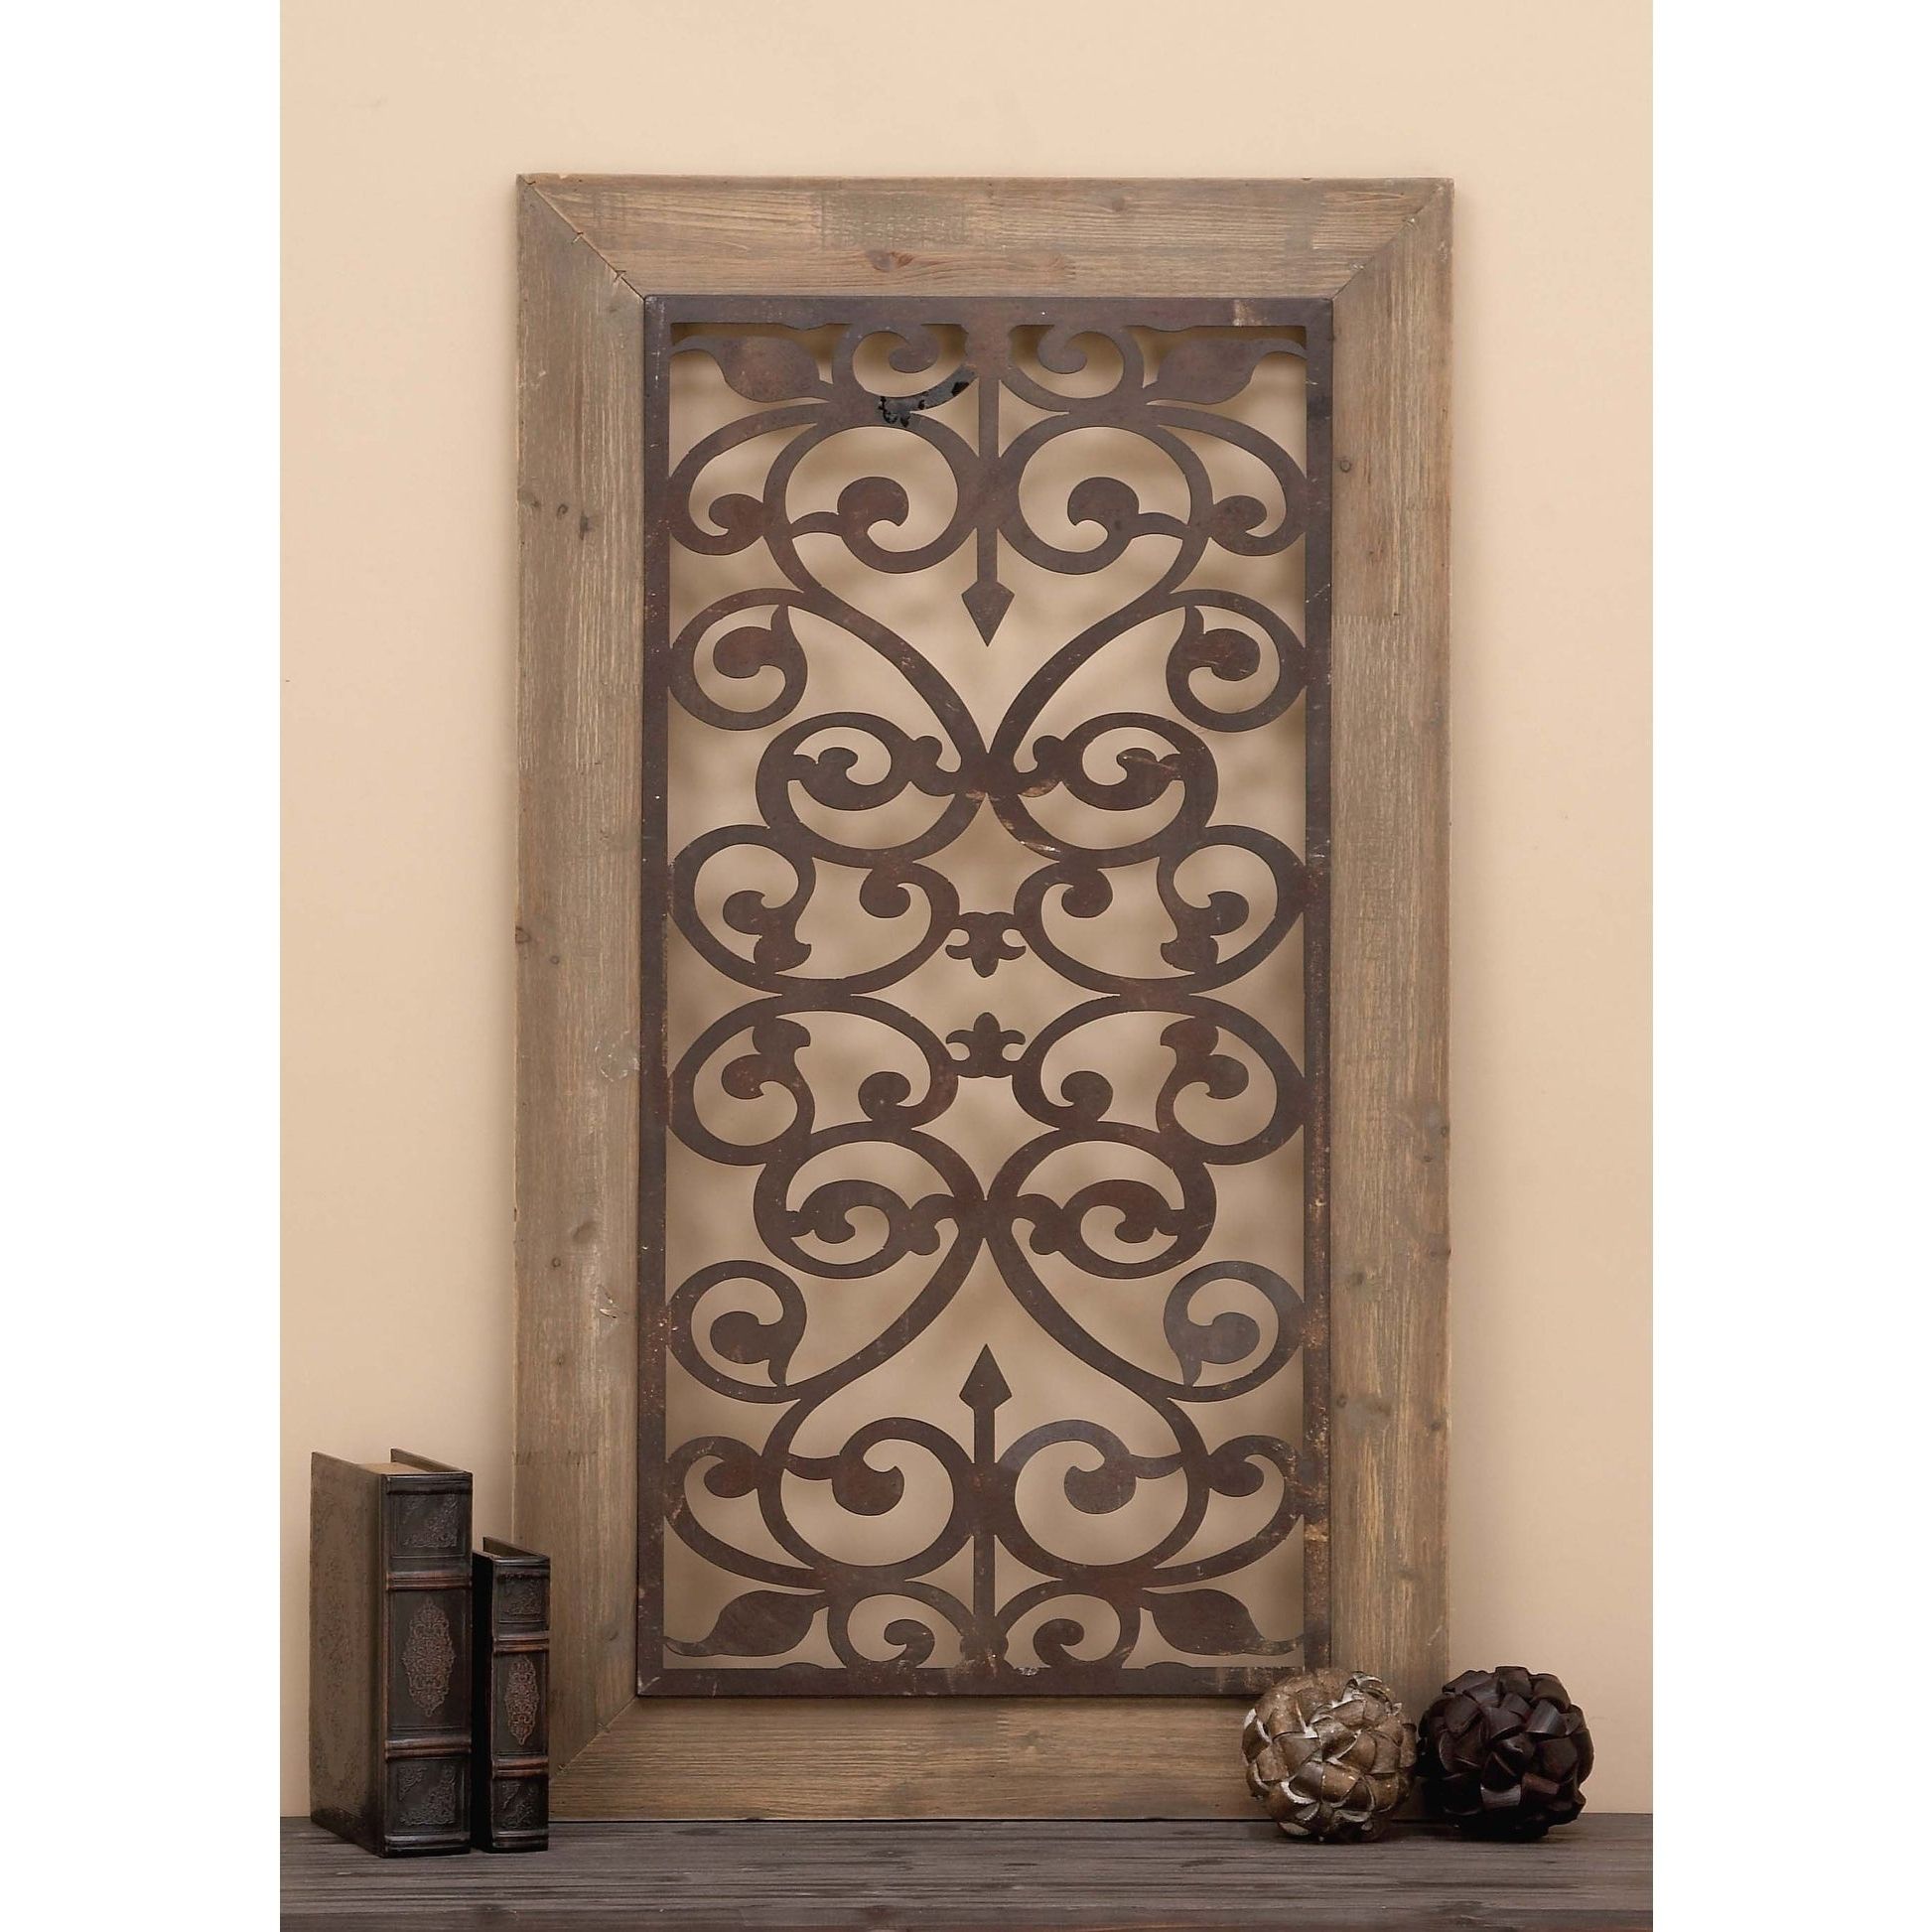 Newest Shop 26" X 46" Distressed Wood & Brown Metal Wall Art Panel W In Rings Wall Decor By Wrought Studio (View 17 of 20)